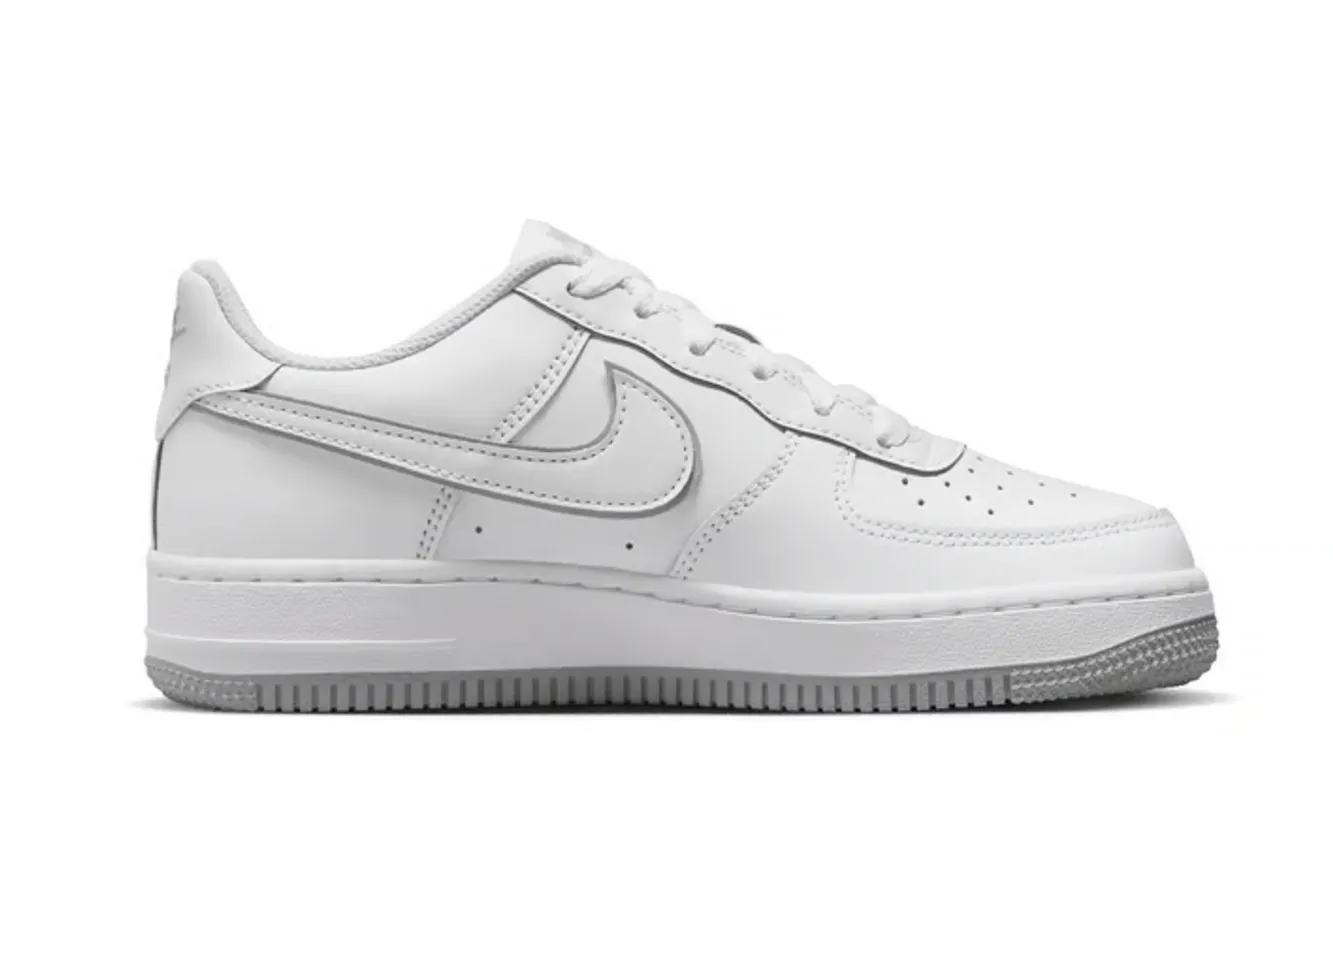 Giày Nike Air Force 1 Low GS 'White Wolf Grey' DX5805-100 màu trắng, 37.5